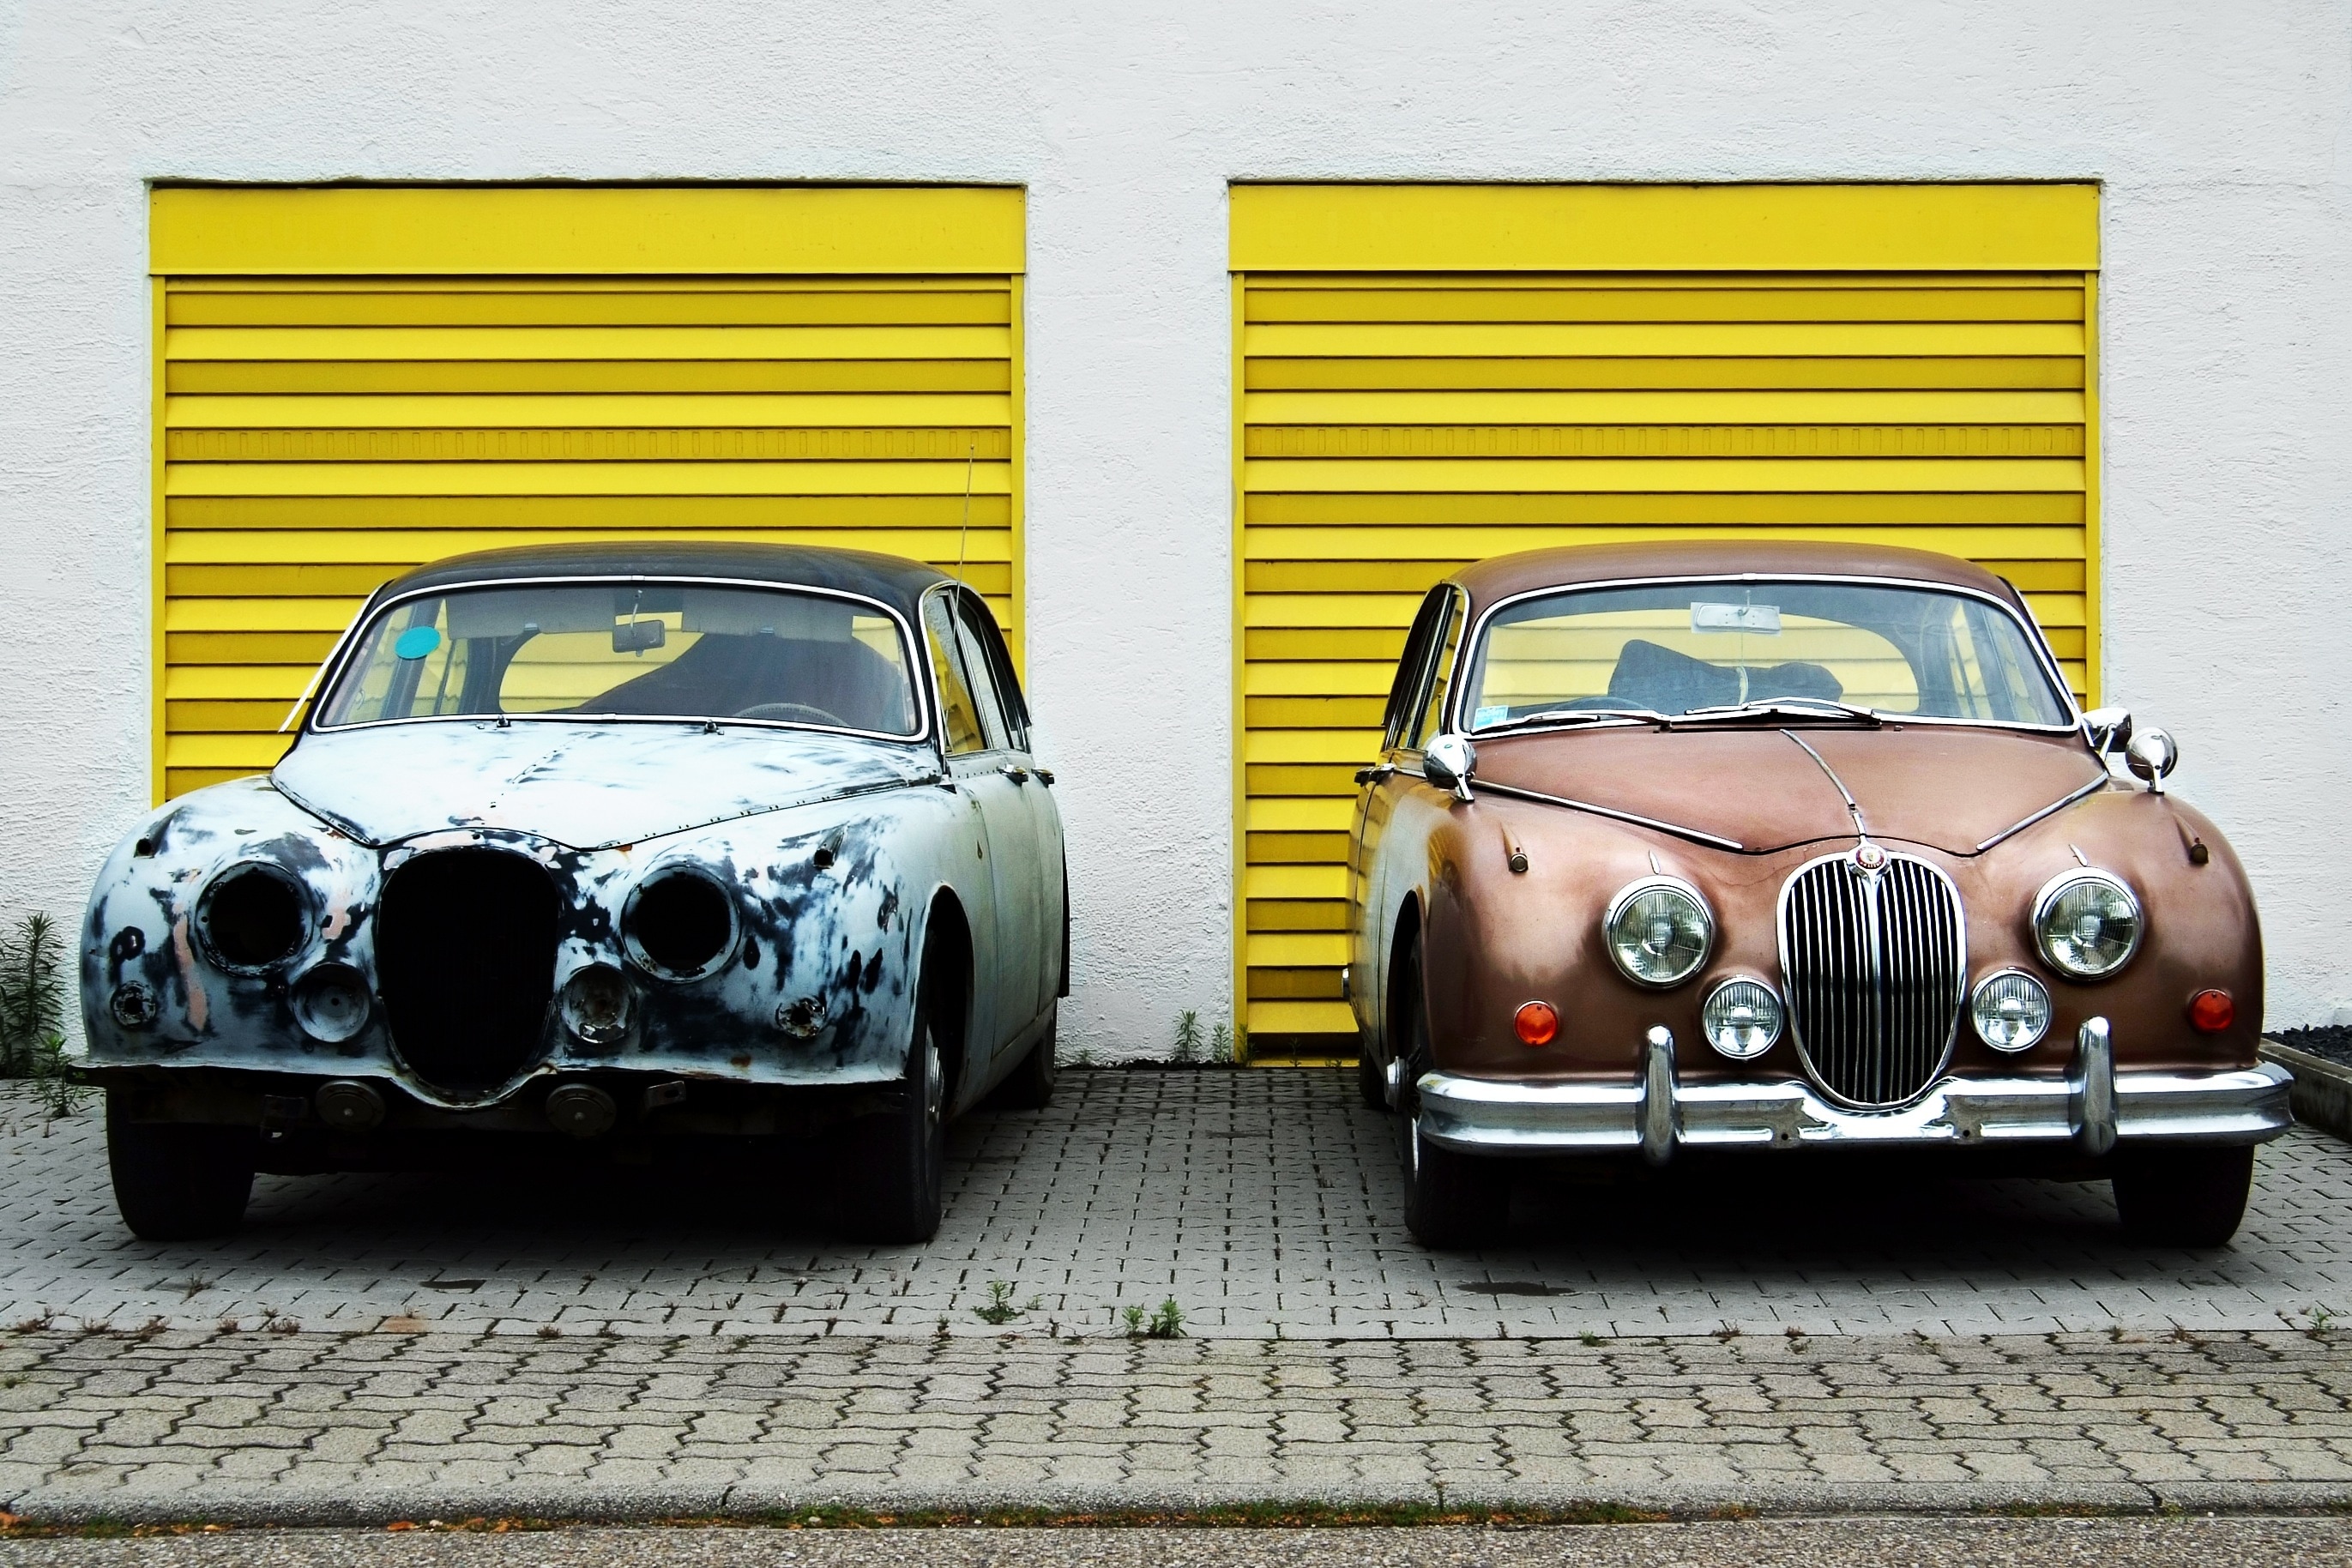 Download Two Vintage Cars Beside Yellow Shutter Doors Free Image Peakpx PSD Mockup Templates